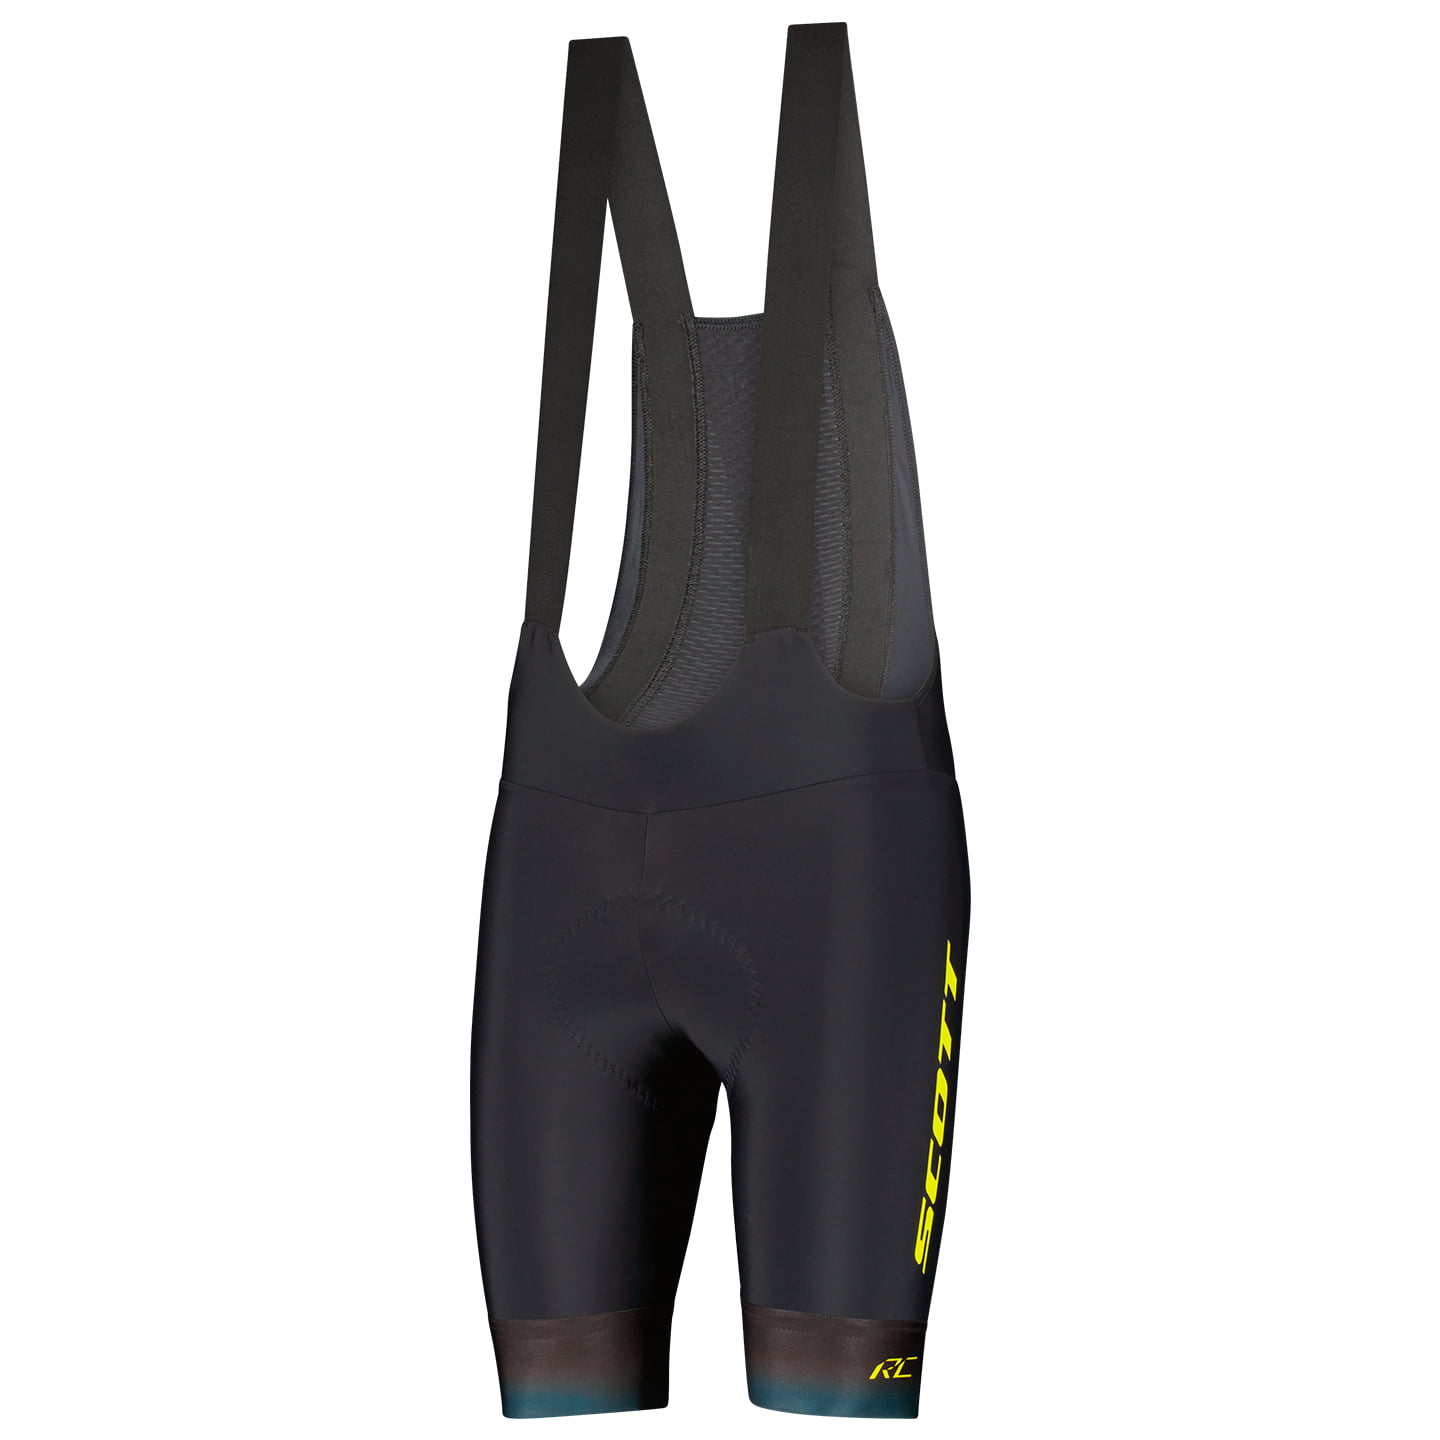 SCOTT RC Pro World Cup Edt. Bib Shorts Bib Shorts, for men, size S, Cycle trousers, Cycle clothing